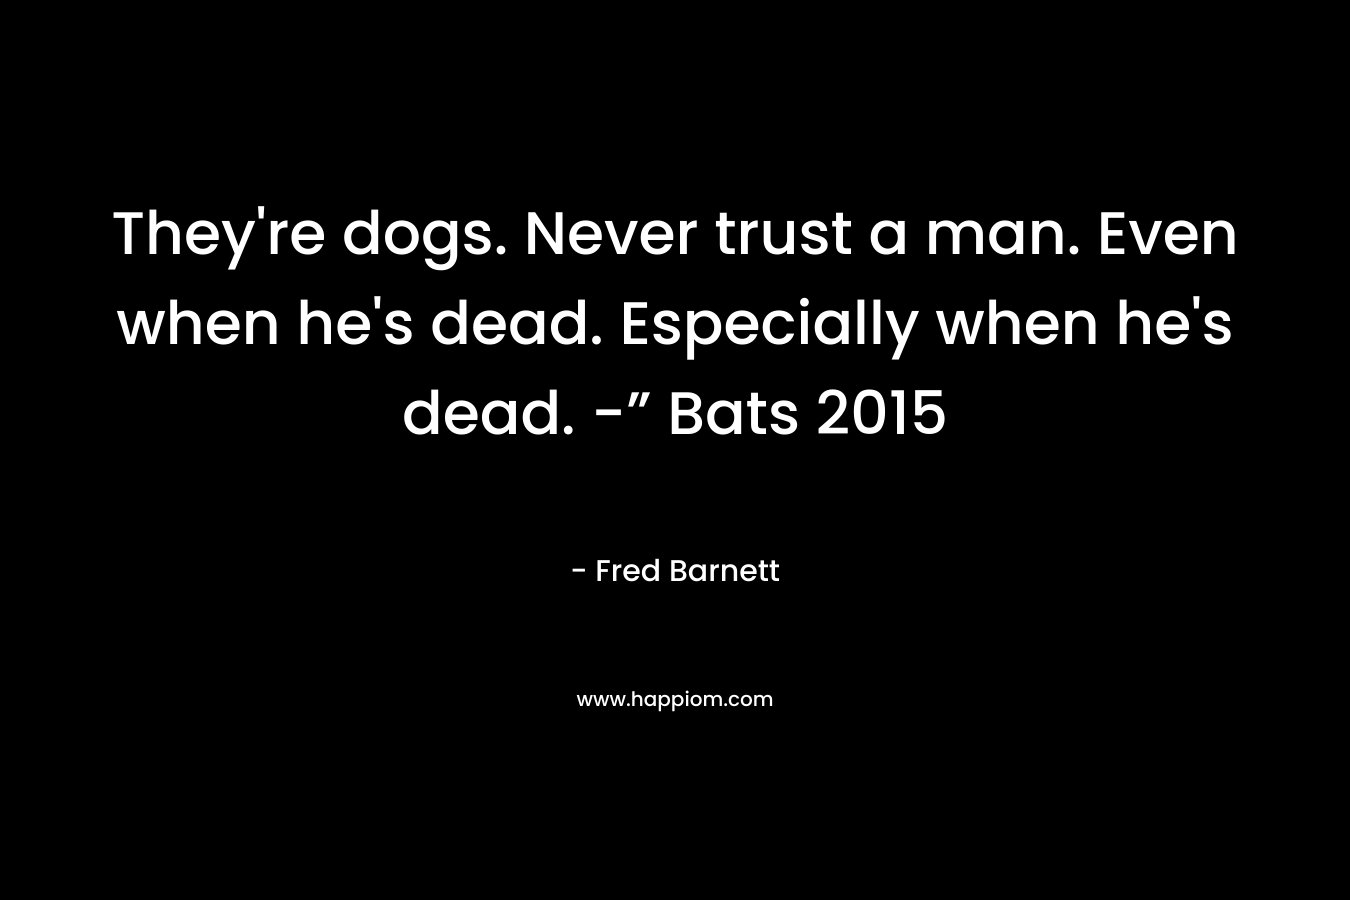 They're dogs. Never trust a man. Even when he's dead. Especially when he's dead. -” Bats 2015